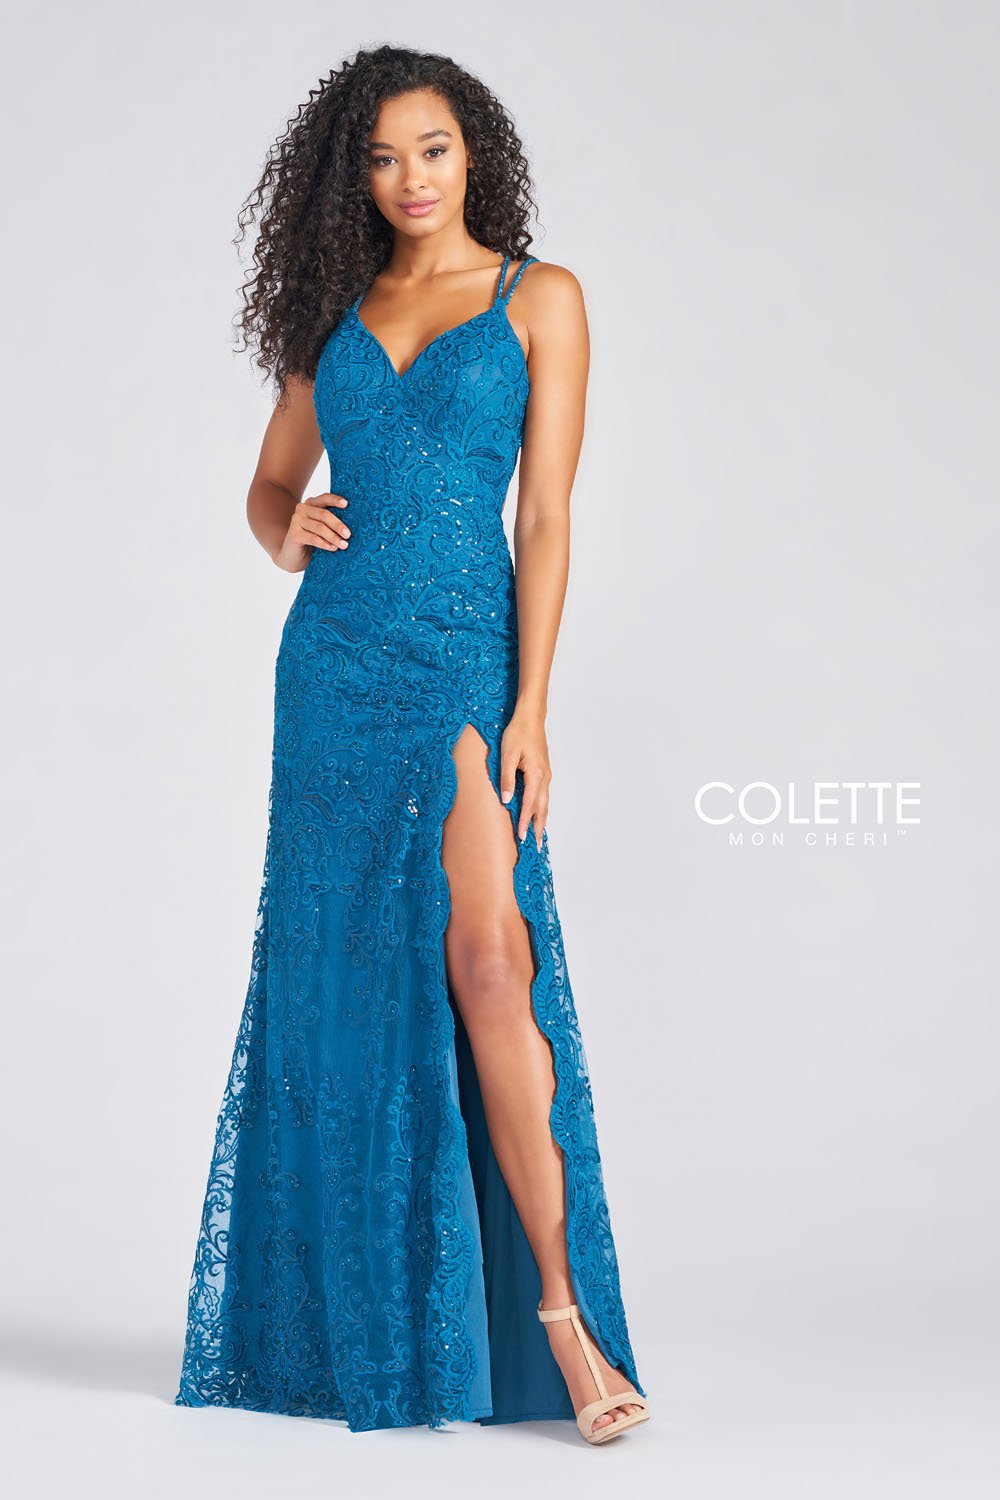 Colette CL12280 Turquoise prom dresses.  Turquoise prom dresses image by Colette.